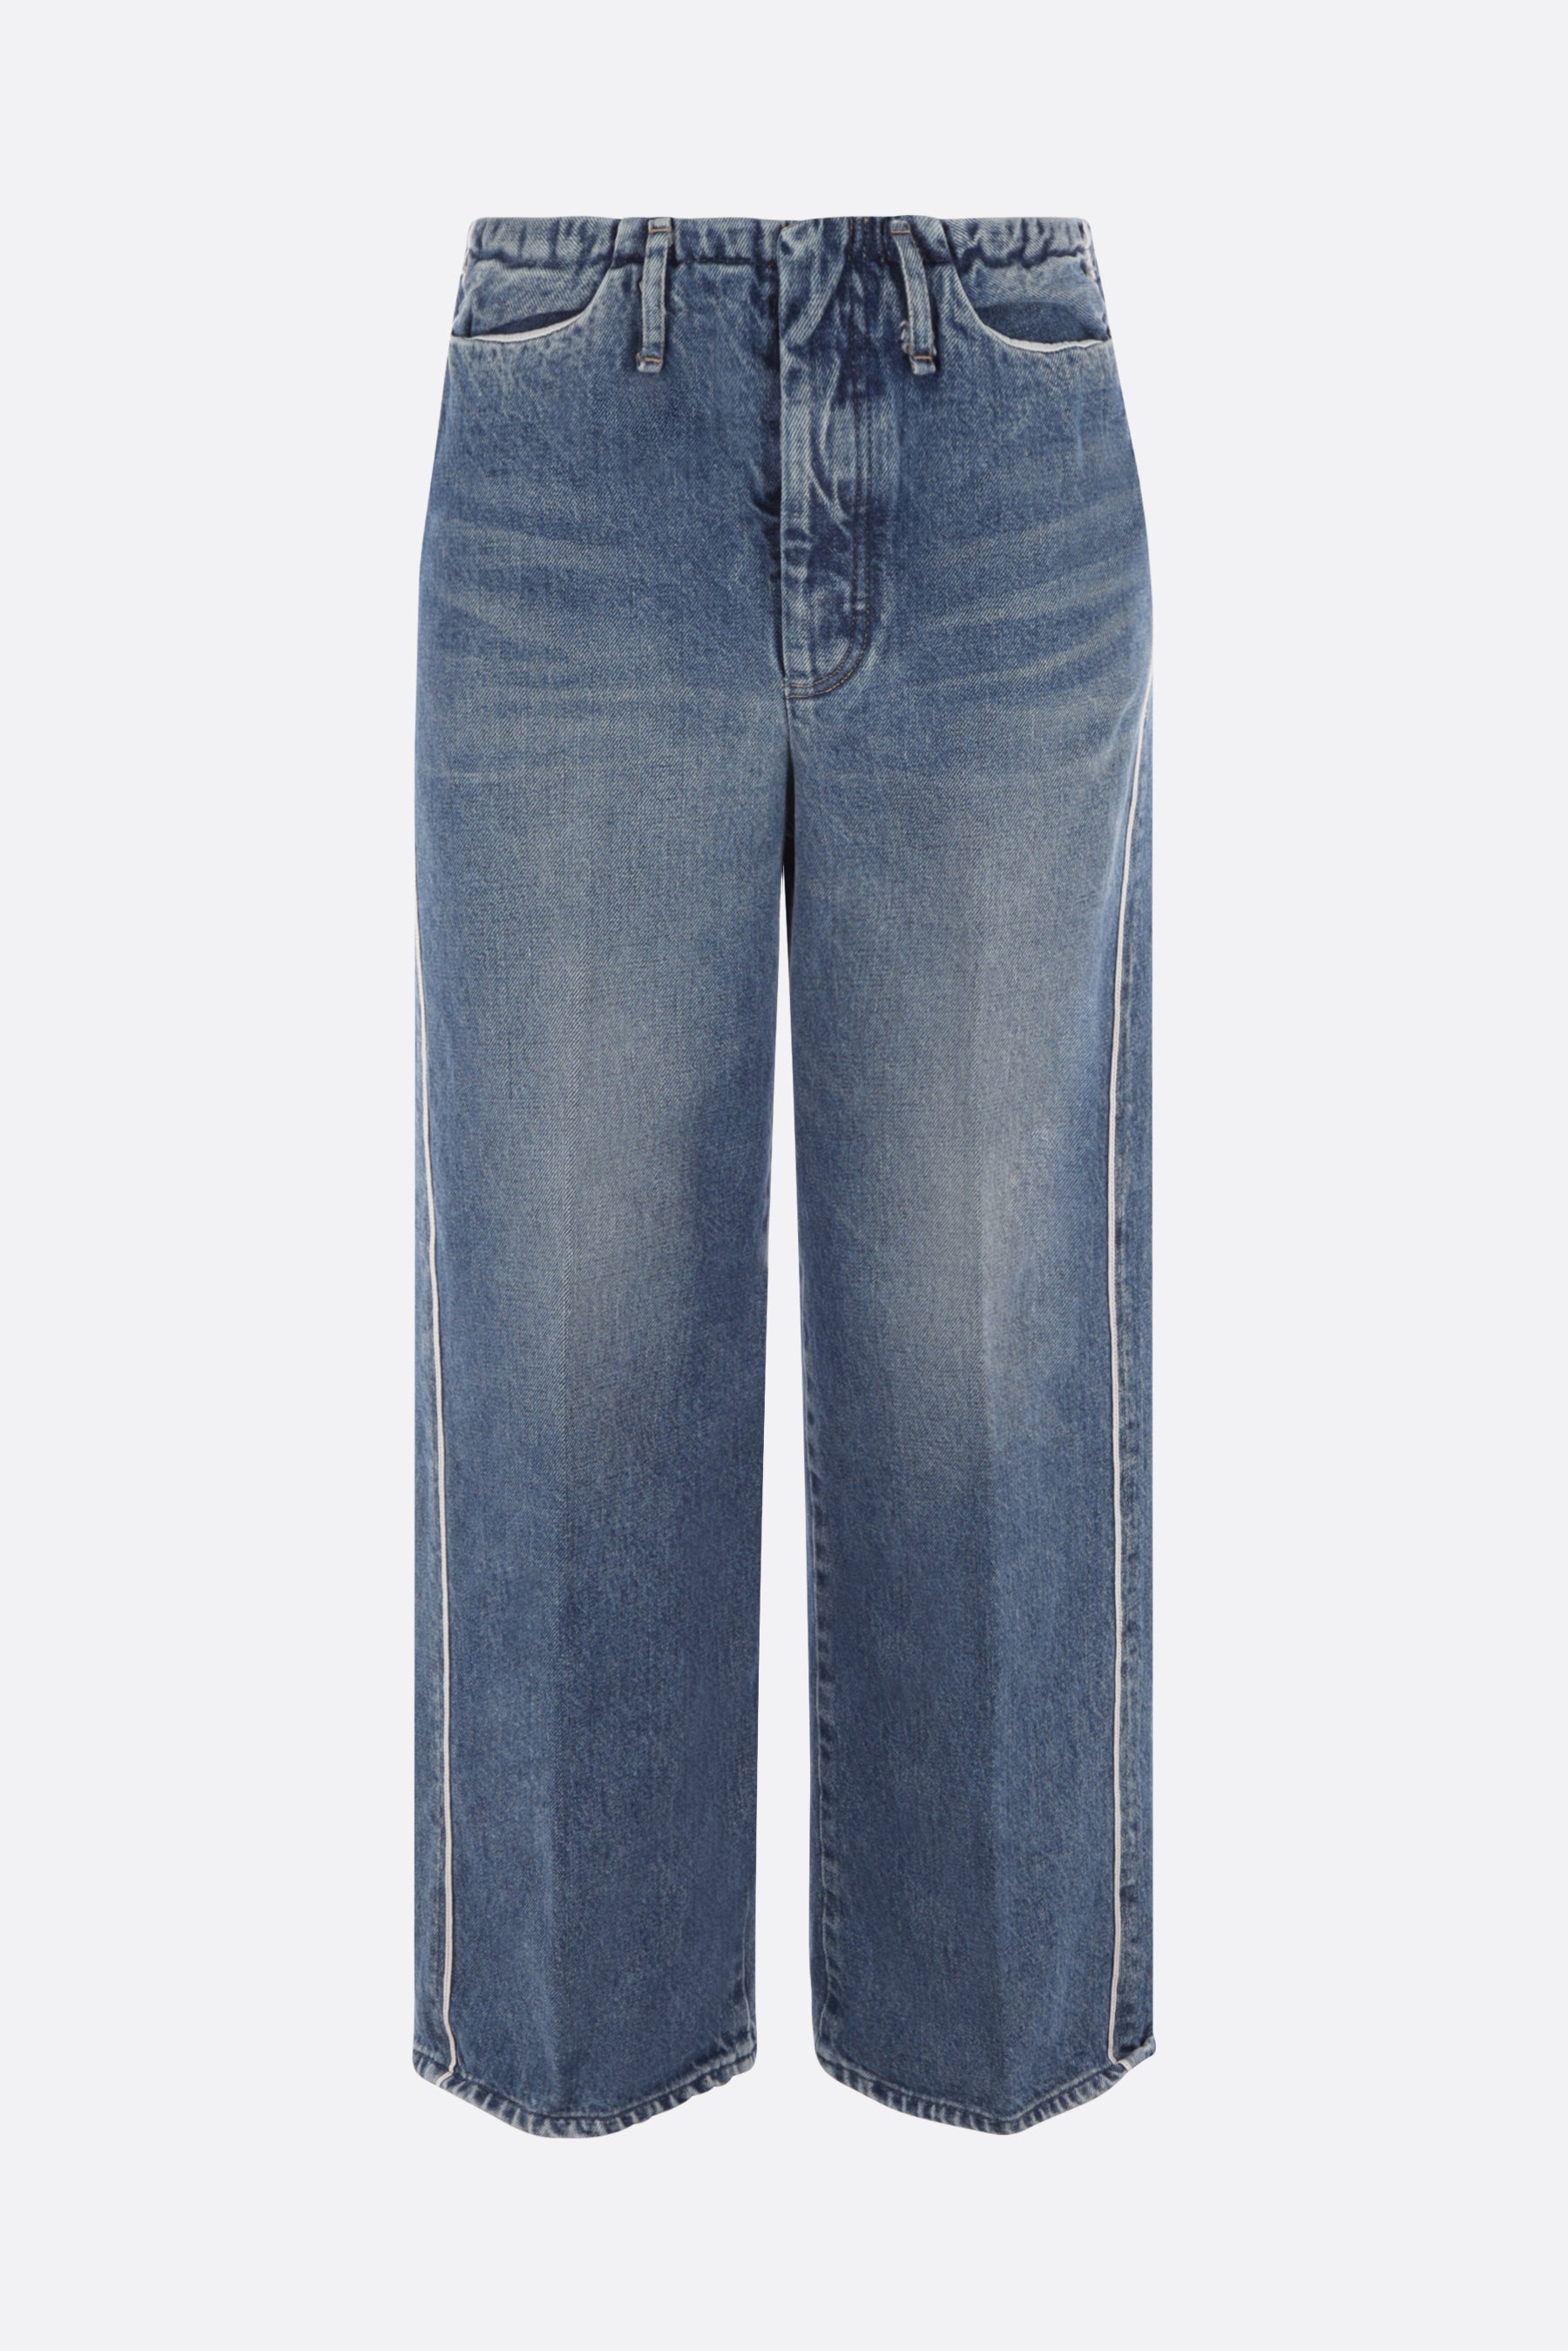 The Selvedge denim cropped jeans